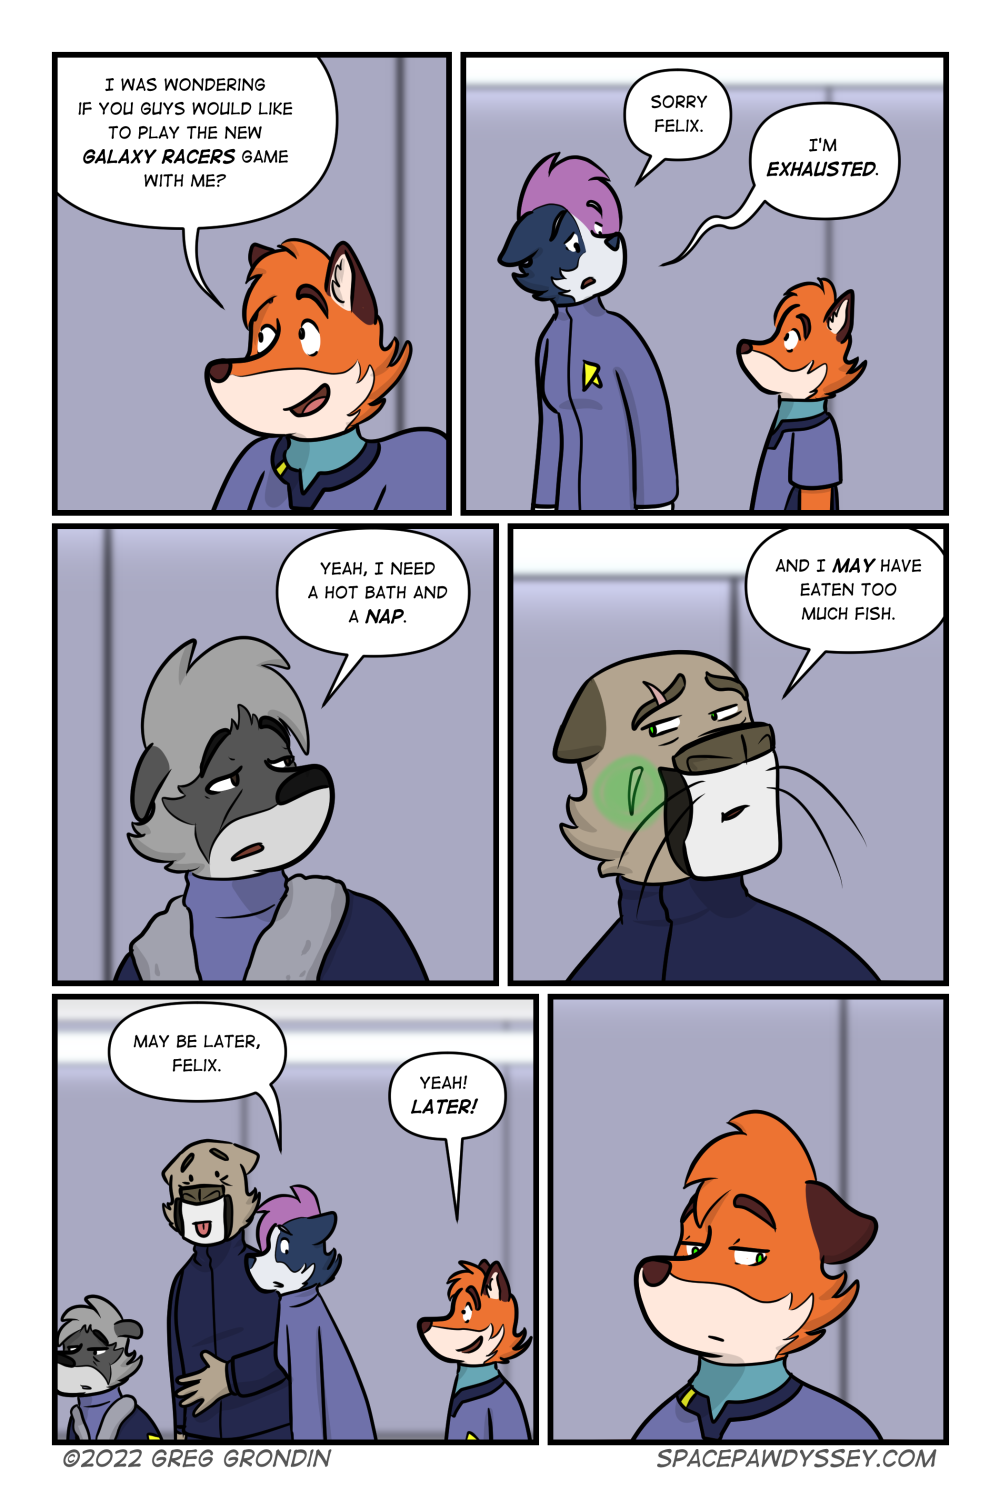 Space Pawdyssey #586